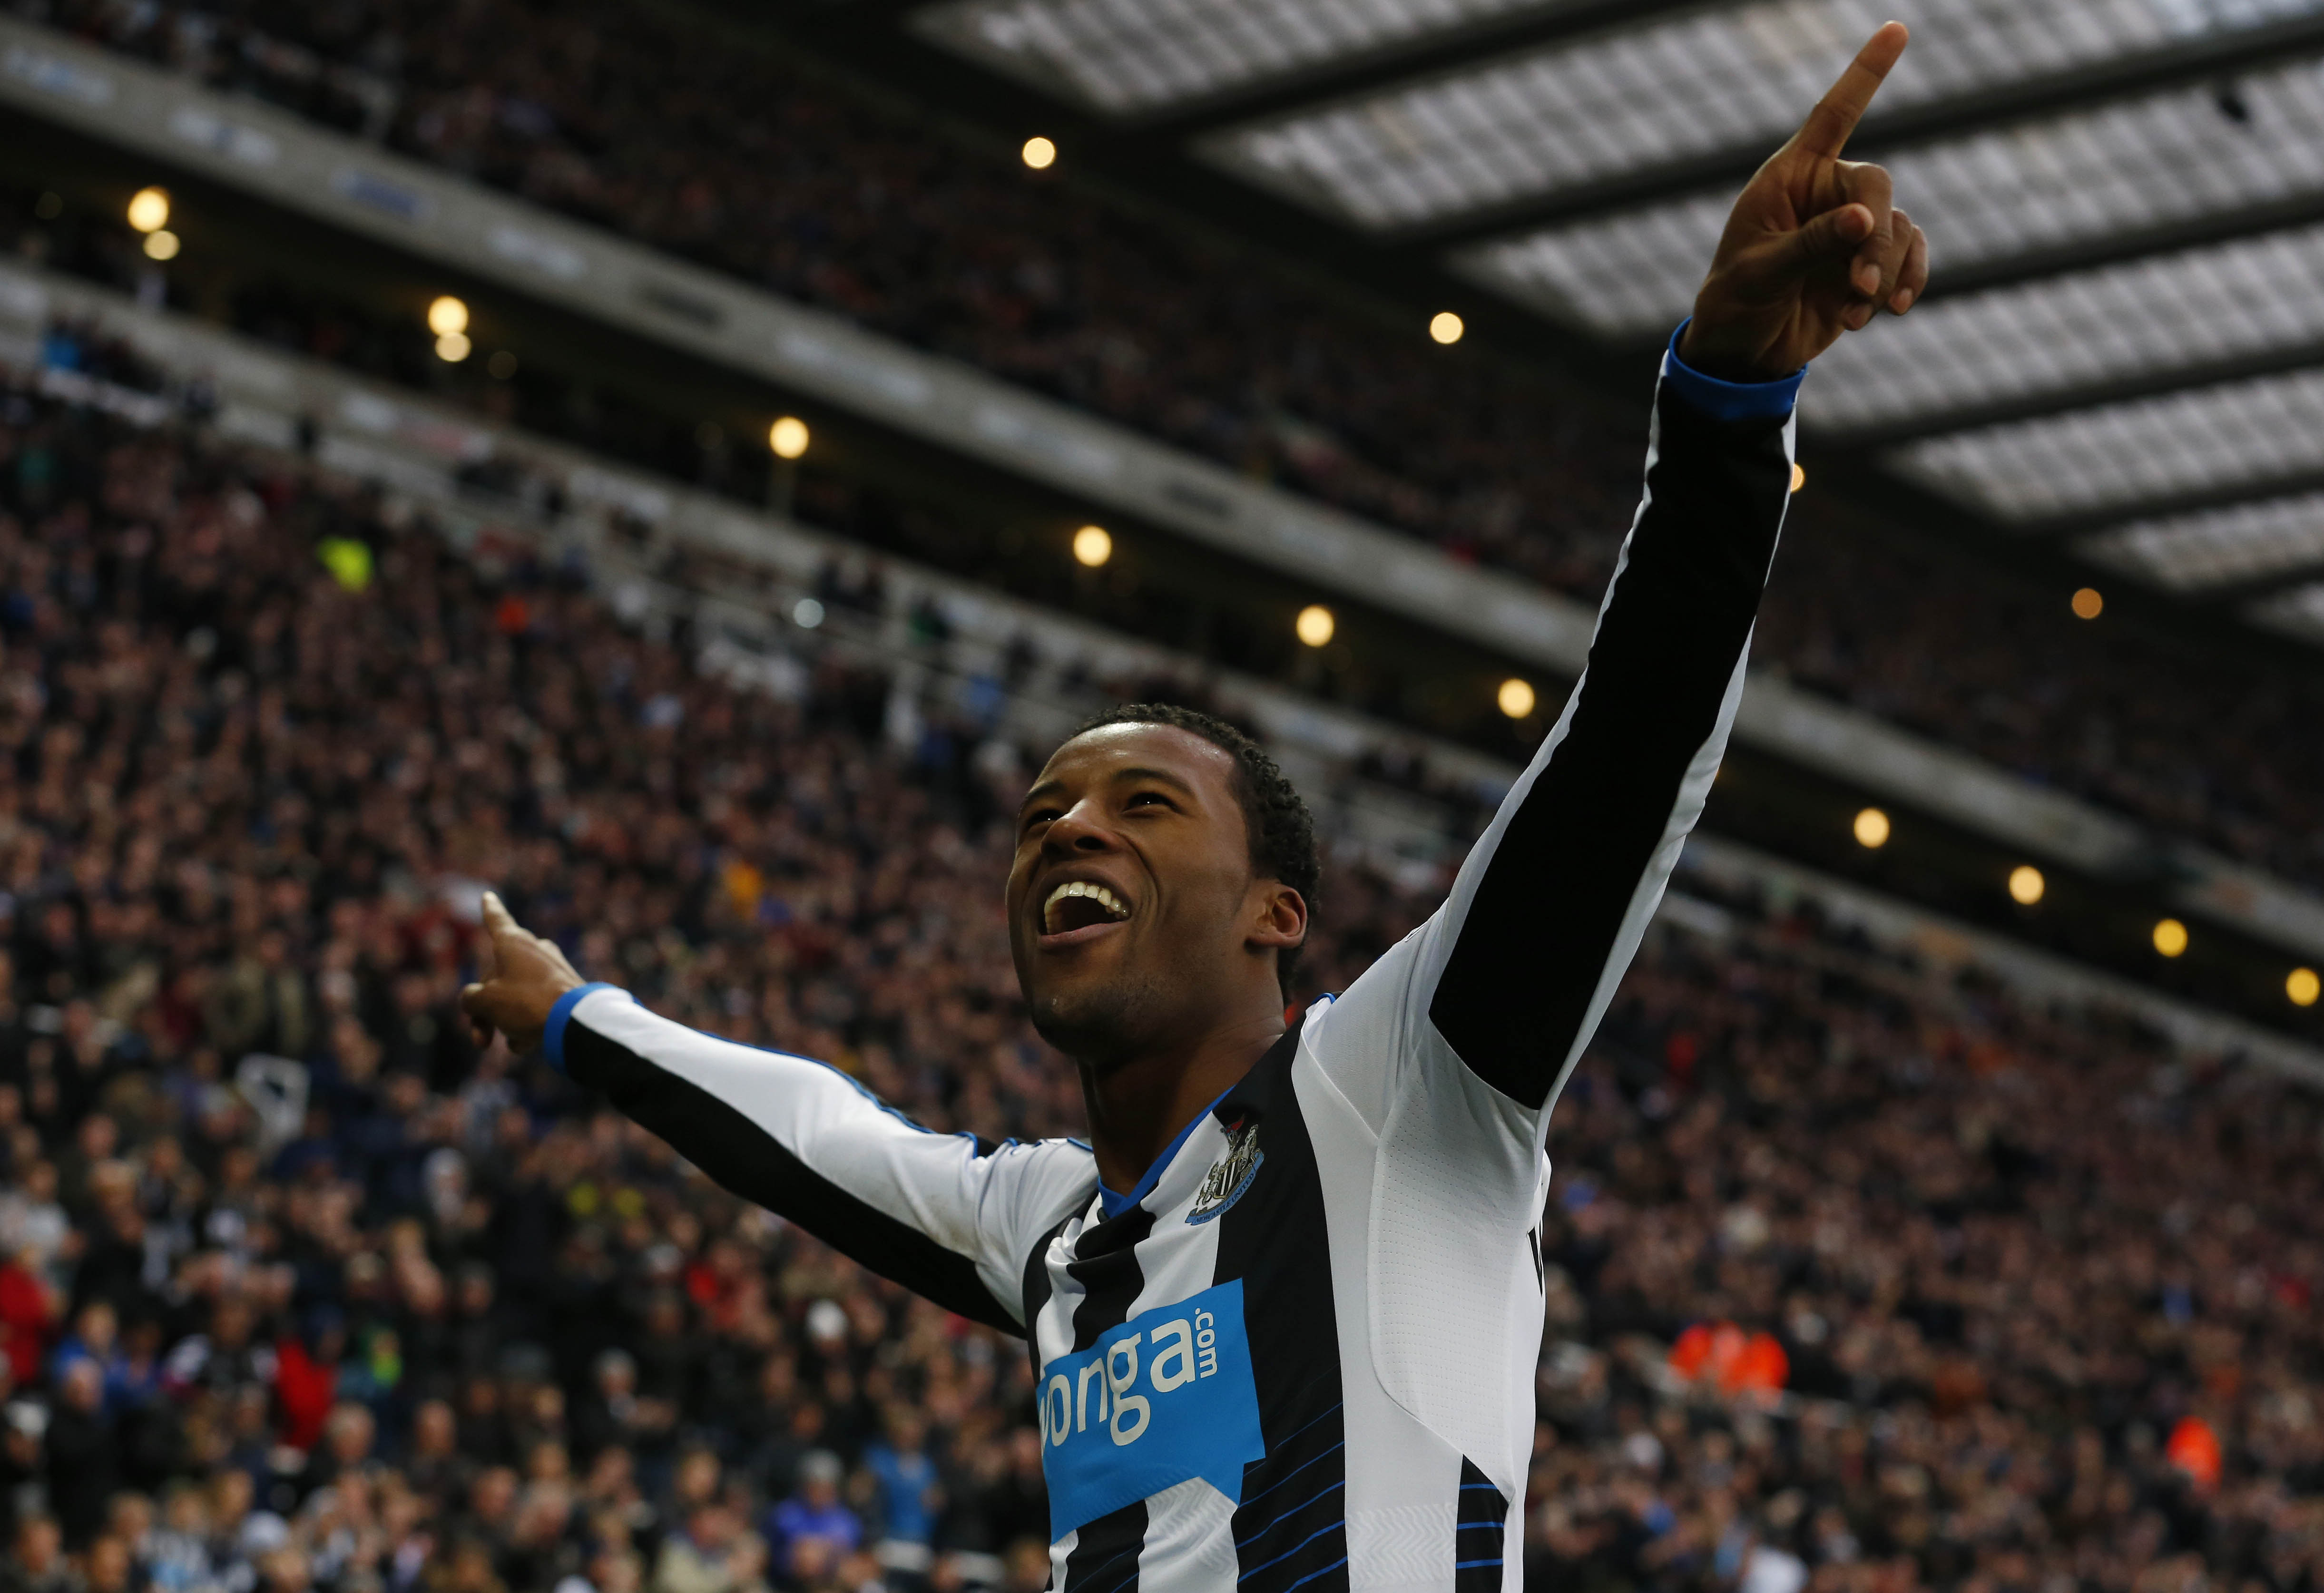 Newcastle United's Dutch midfielder Georginio Wijnaldum (R) celebrates scoring his team's second goal during the English Premier League football match between Newcastle United and West Ham United at St James' Park in Newcastle-upon-Tyne, north east England on January 16, 2016.  AFP PHOTO / LINDSEY PARNABY

RESTRICTED TO EDITORIAL USE. No use with unauthorized audio, video, data, fixture lists, club/league logos or 'live' services. Online in-match use limited to 75 images, no video emulation. No use in betting, games or single club/league/player publications. / AFP / LINDSEY PARNABY        (Photo credit should read LINDSEY PARNABY/AFP/Getty Images)